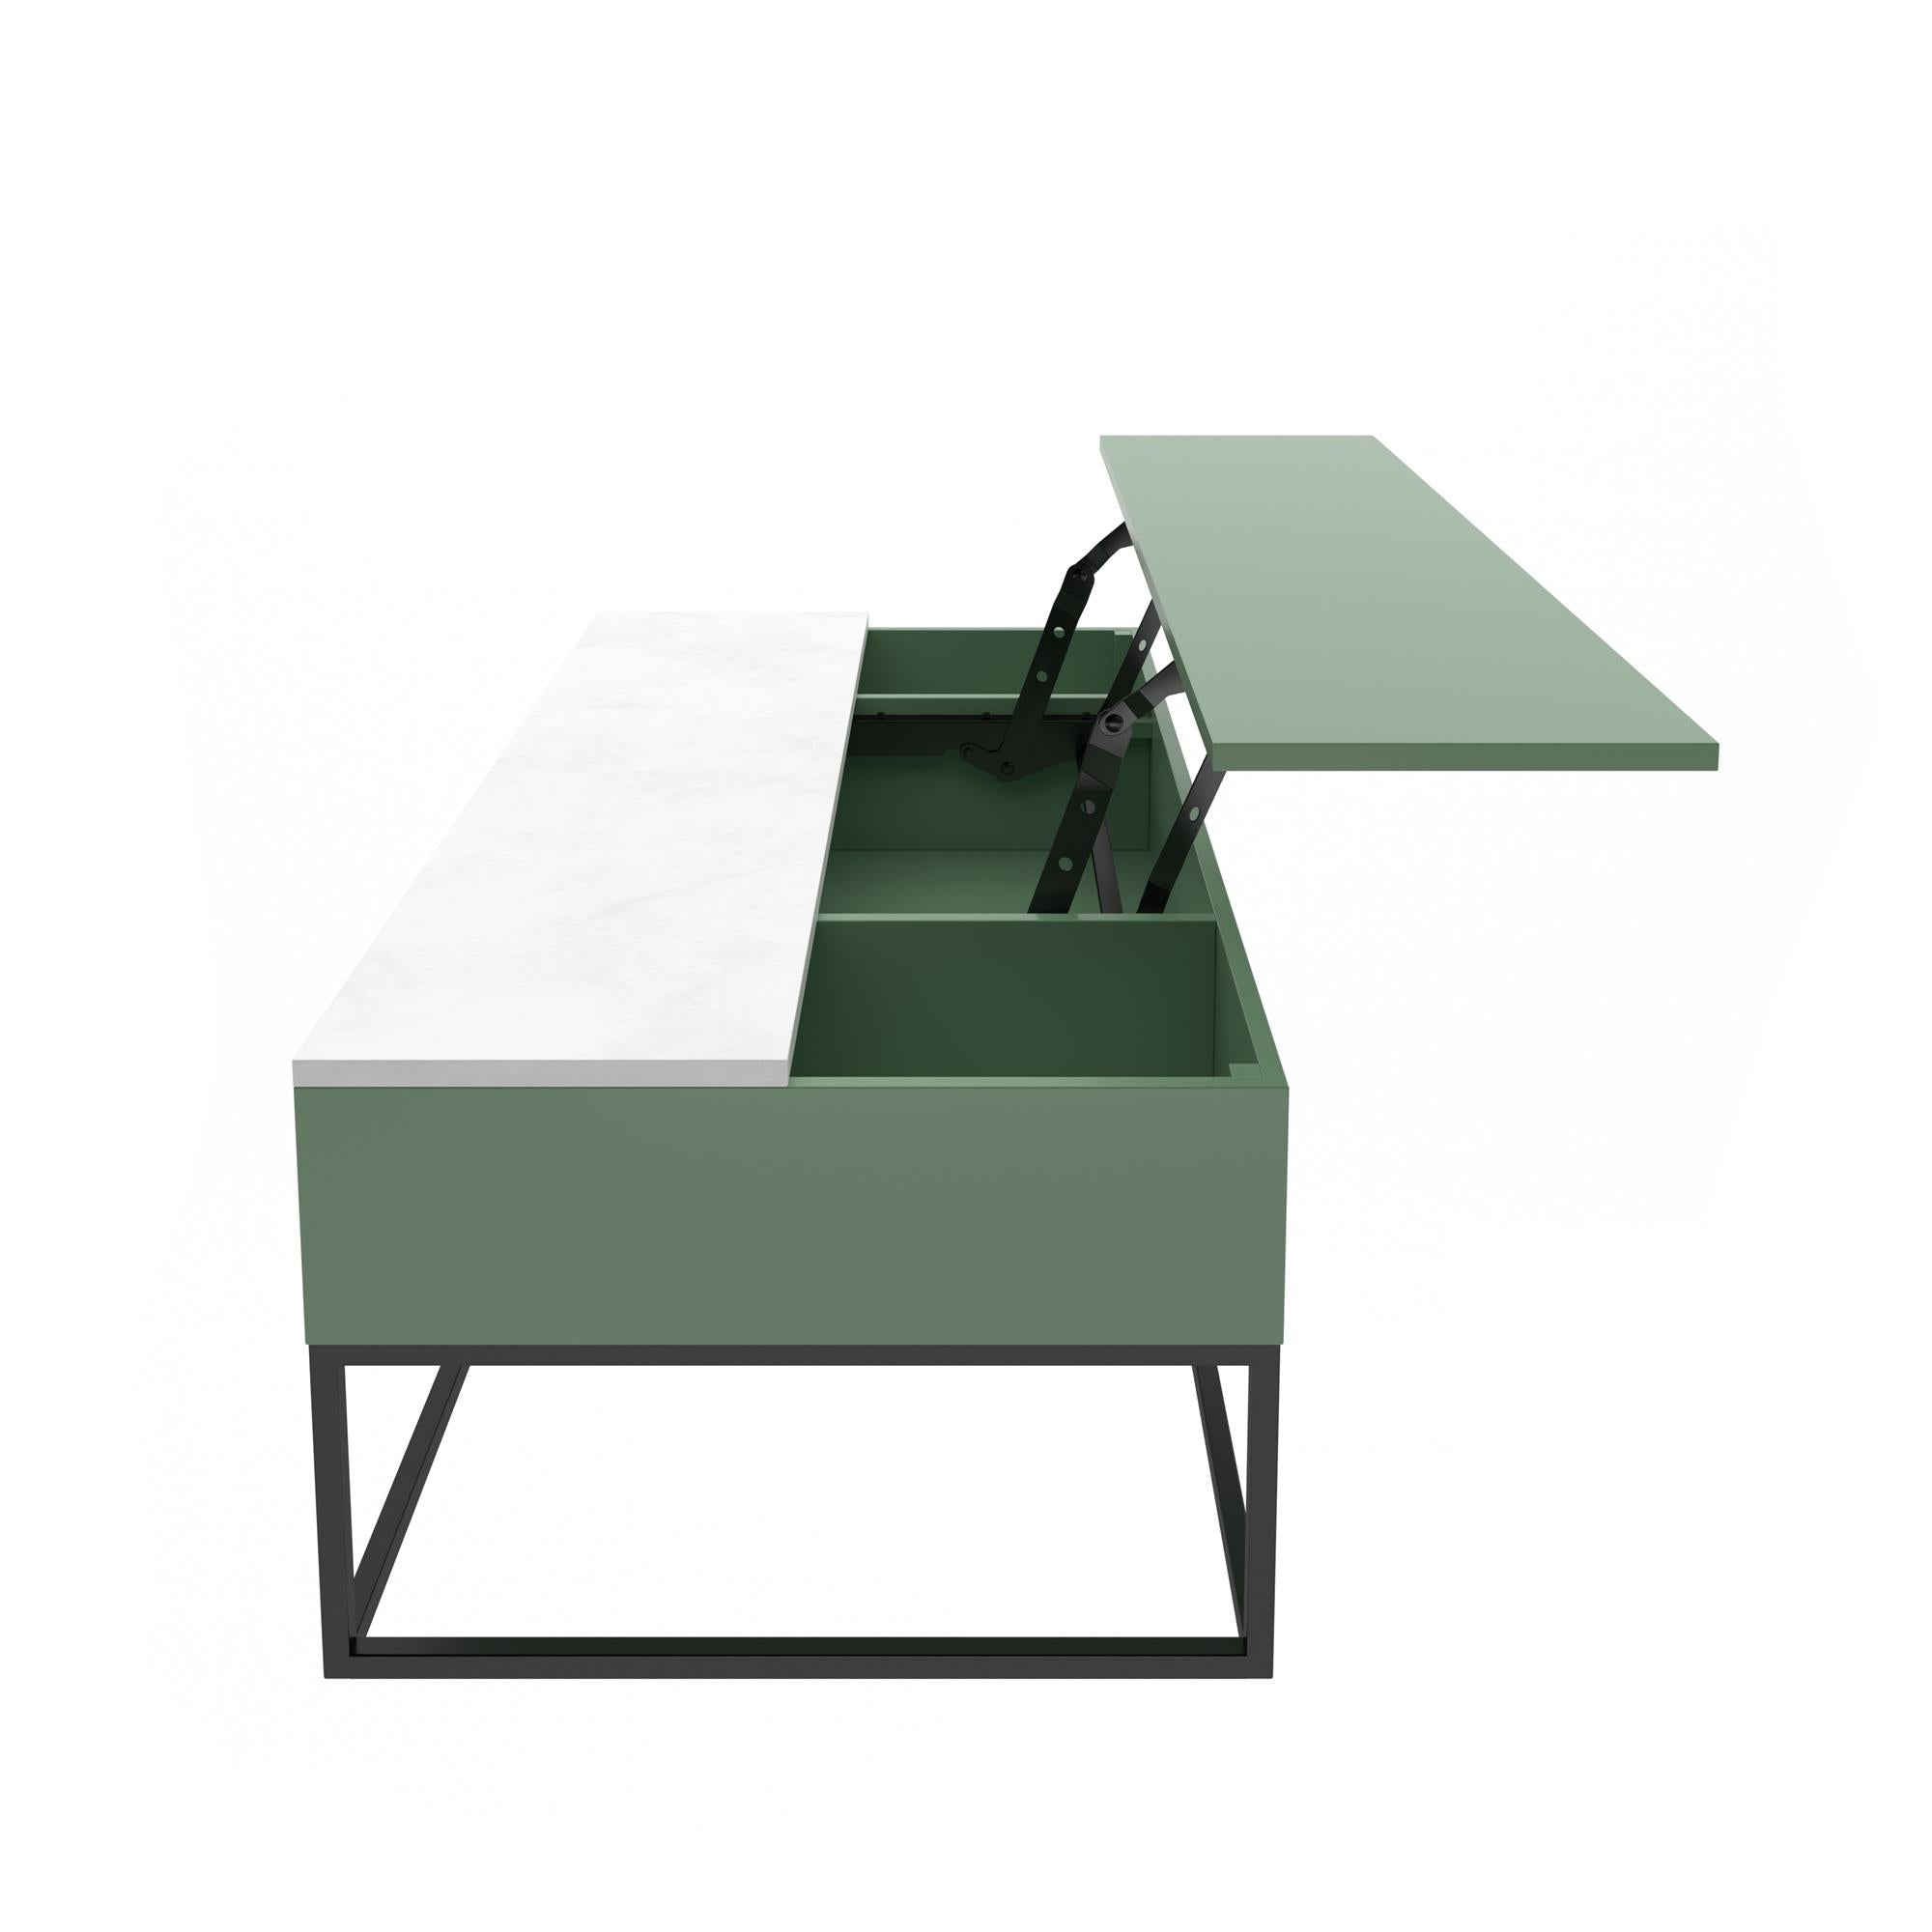 The Village Perry Lift-Top Coffee Table, Sage Green - Sage